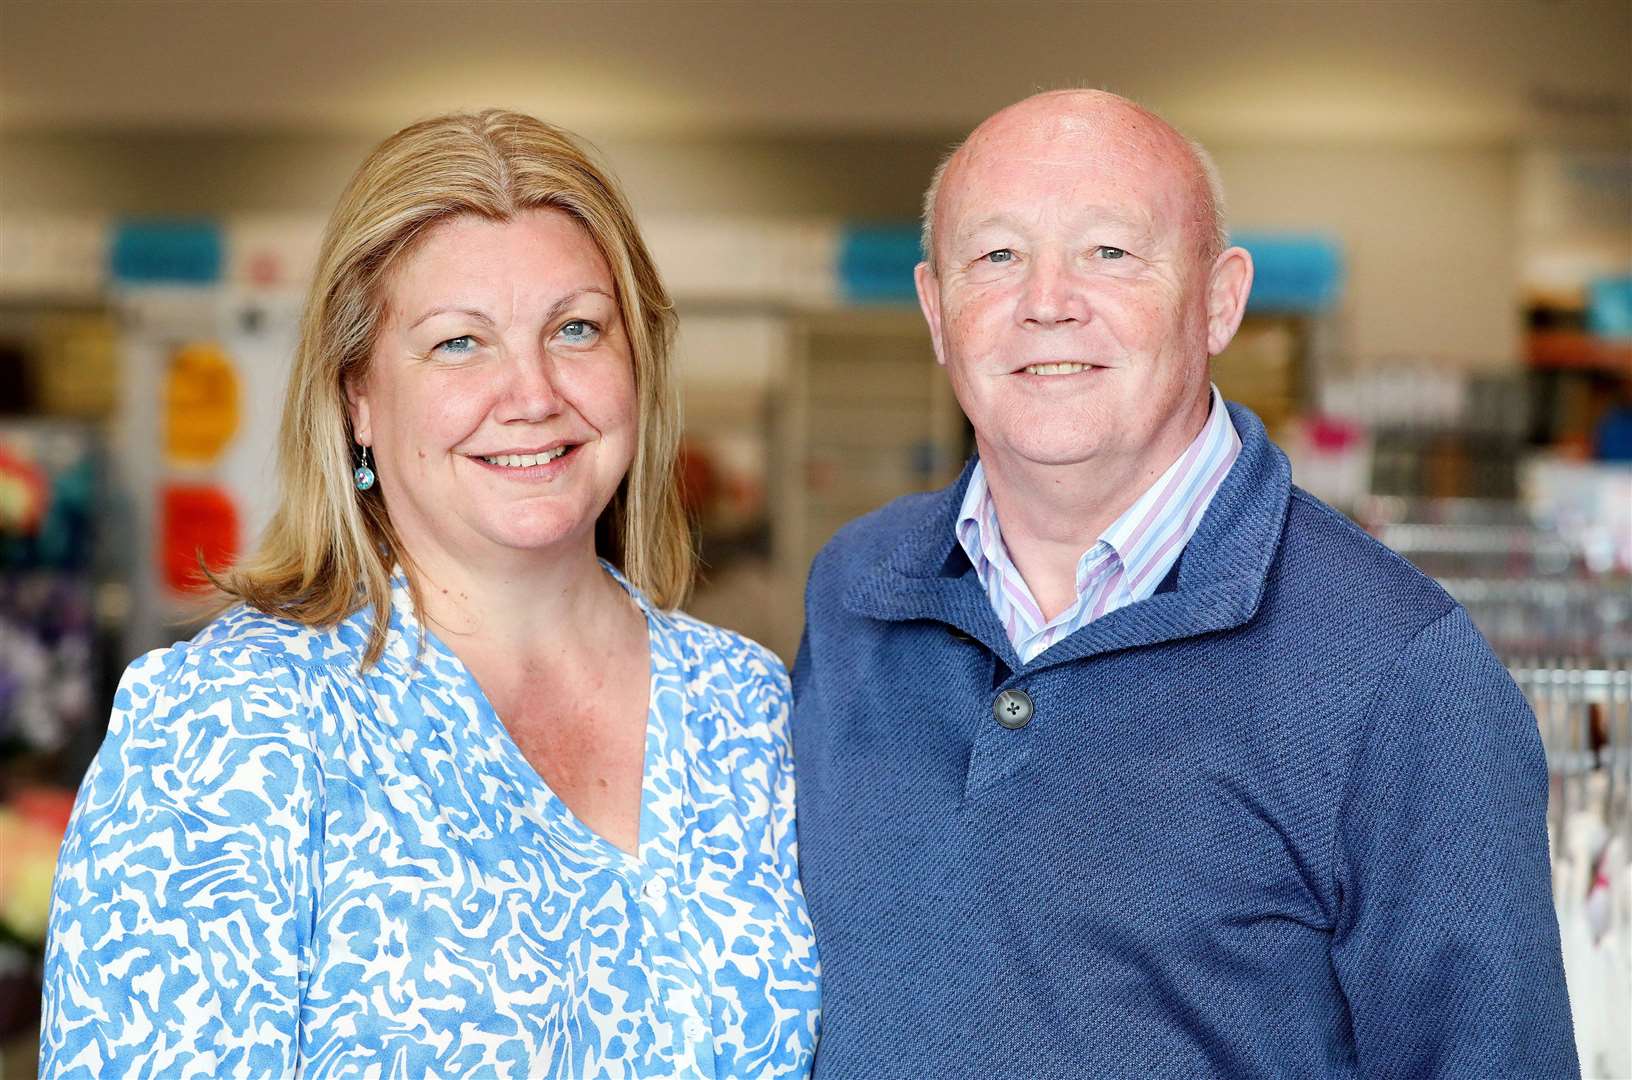 David Leavesley, of Chartham, near Canterbury, with his wife Dee. Mr Leavesley is calling for the next government to create a "turning point for cancer". Picture: SWNS